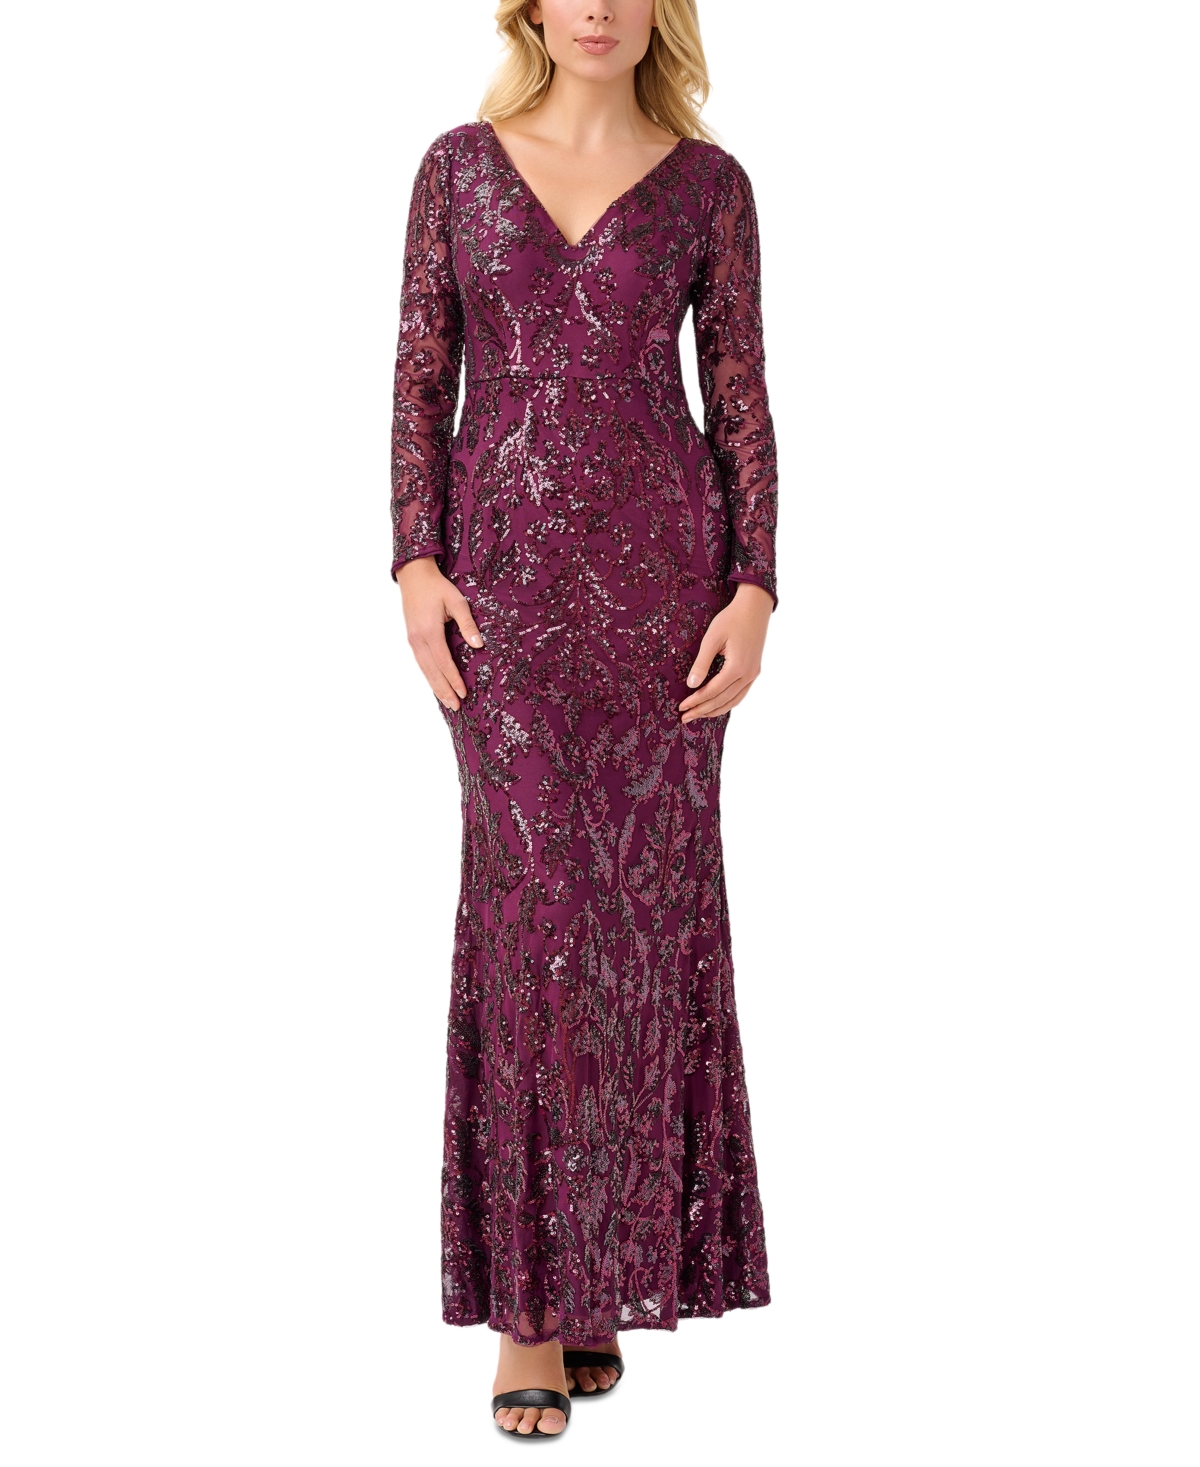 Adrianna Papell Embellished Long-Sleeve Gown